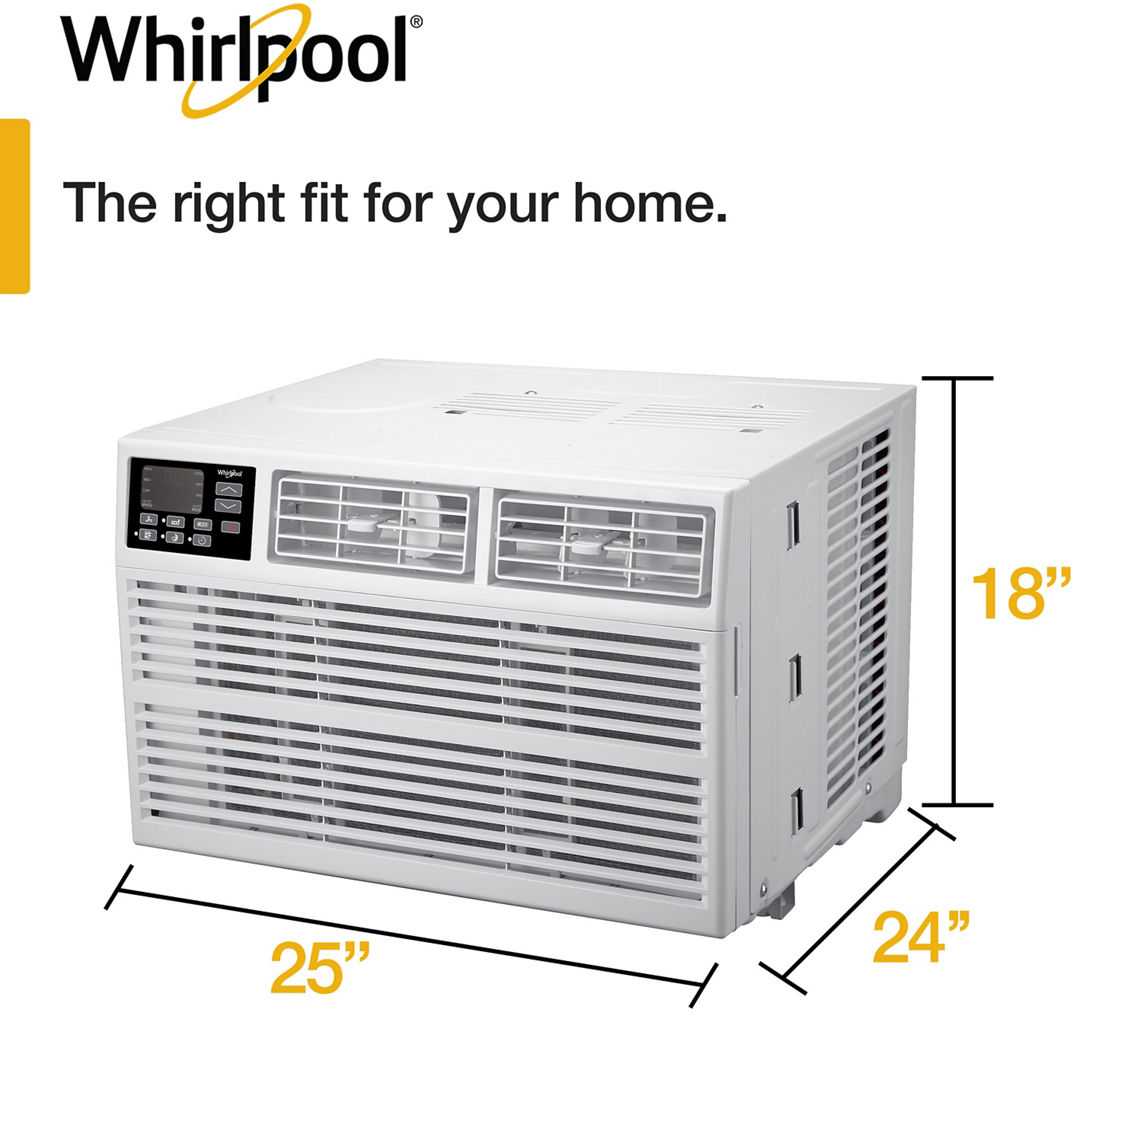 Whirlpool 15,000 BTU 115V Window-Mounted Air Conditioner with Remote Control - Image 4 of 6